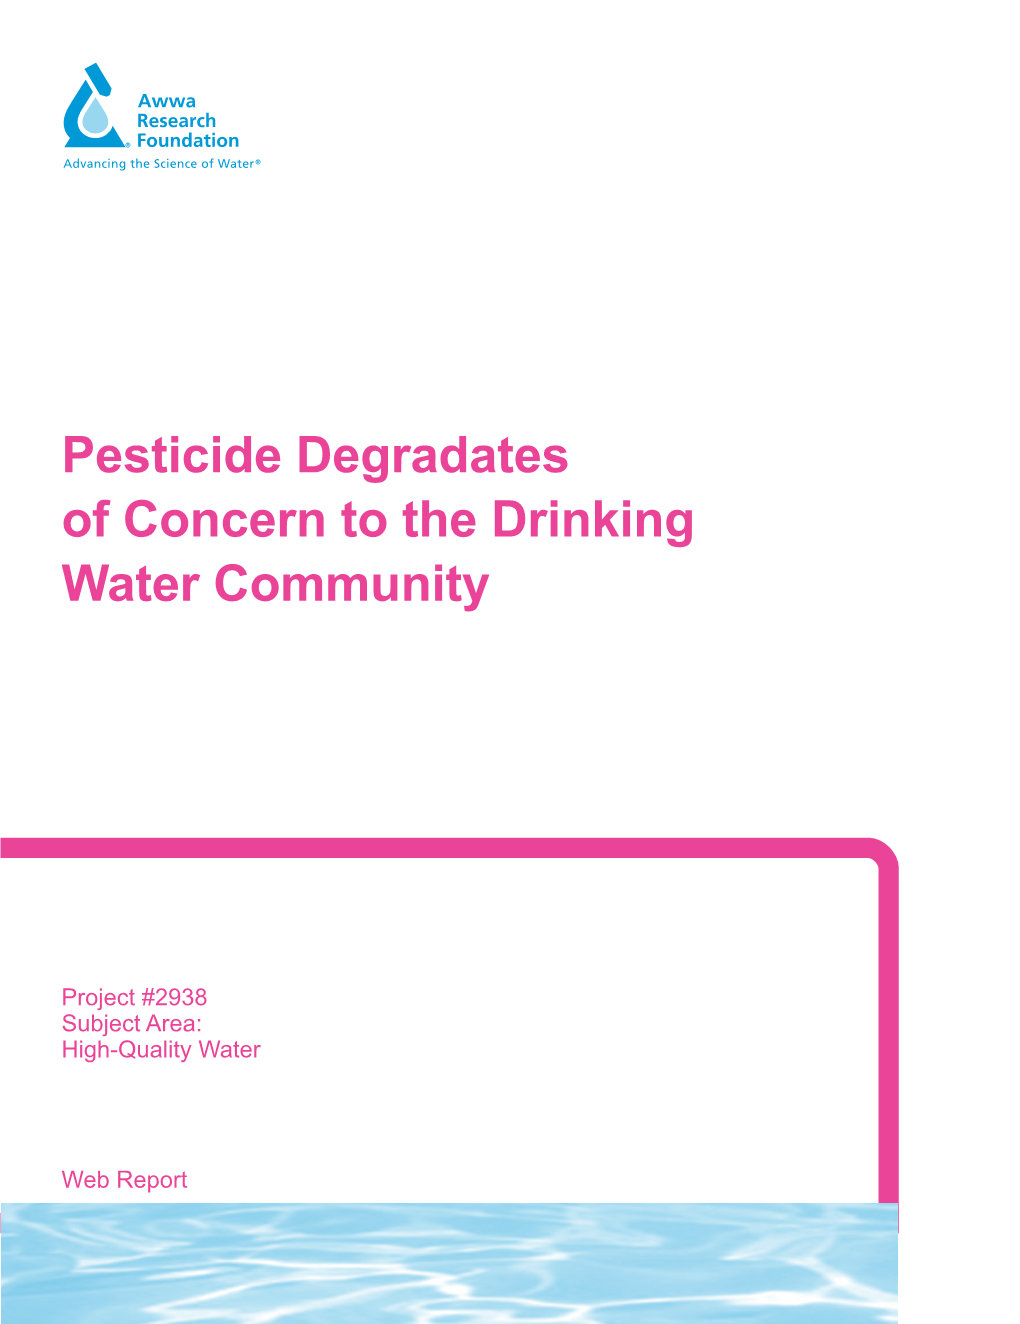 Pesticide Degradates of Concern to the Drinking Water Community